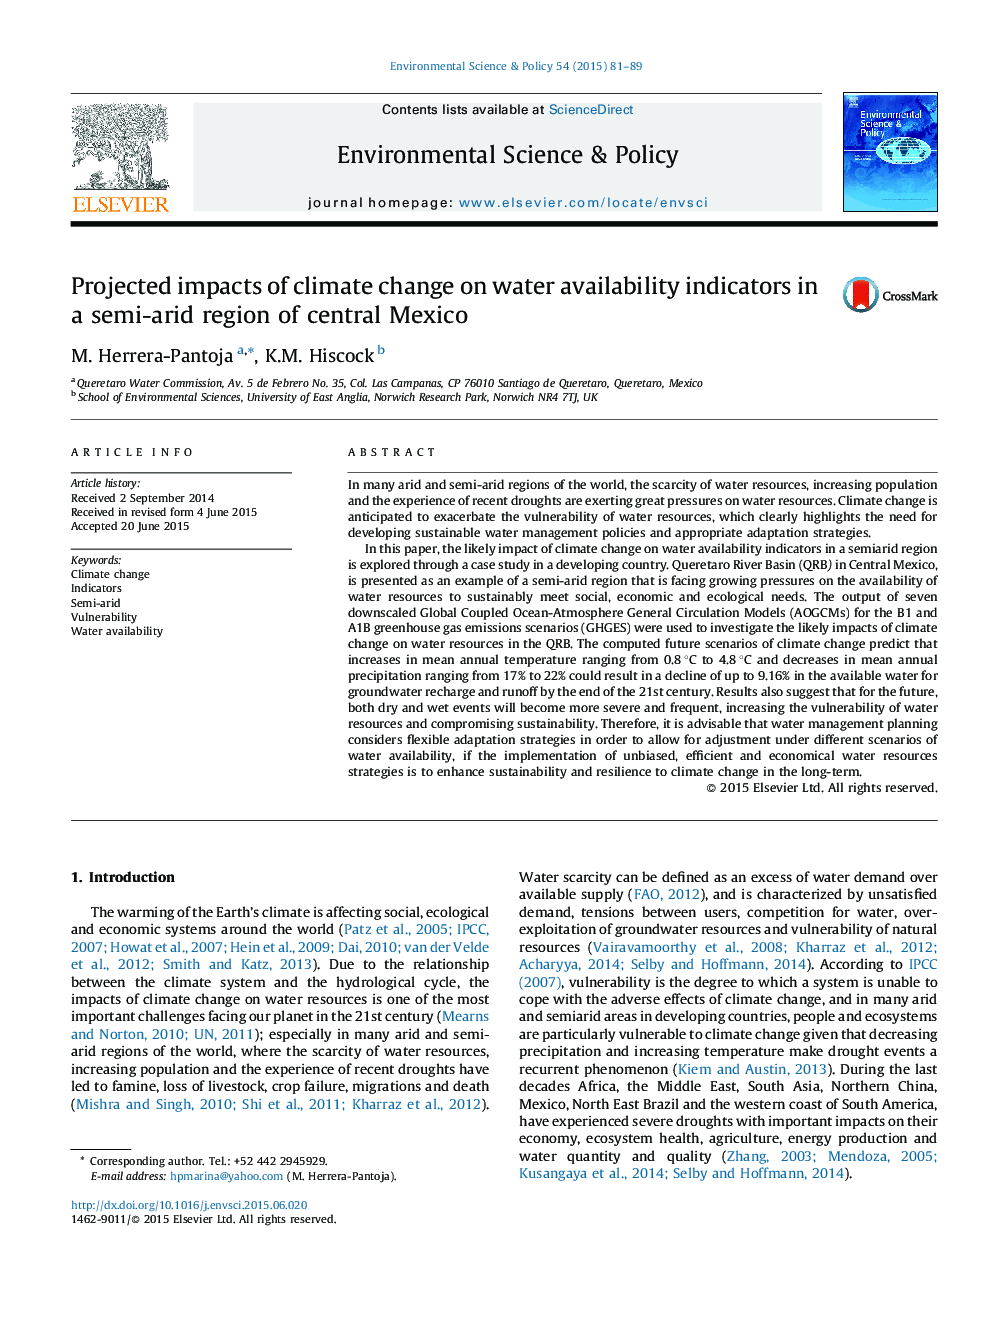 Projected impacts of climate change on water availability indicators in a semi-arid region of central Mexico